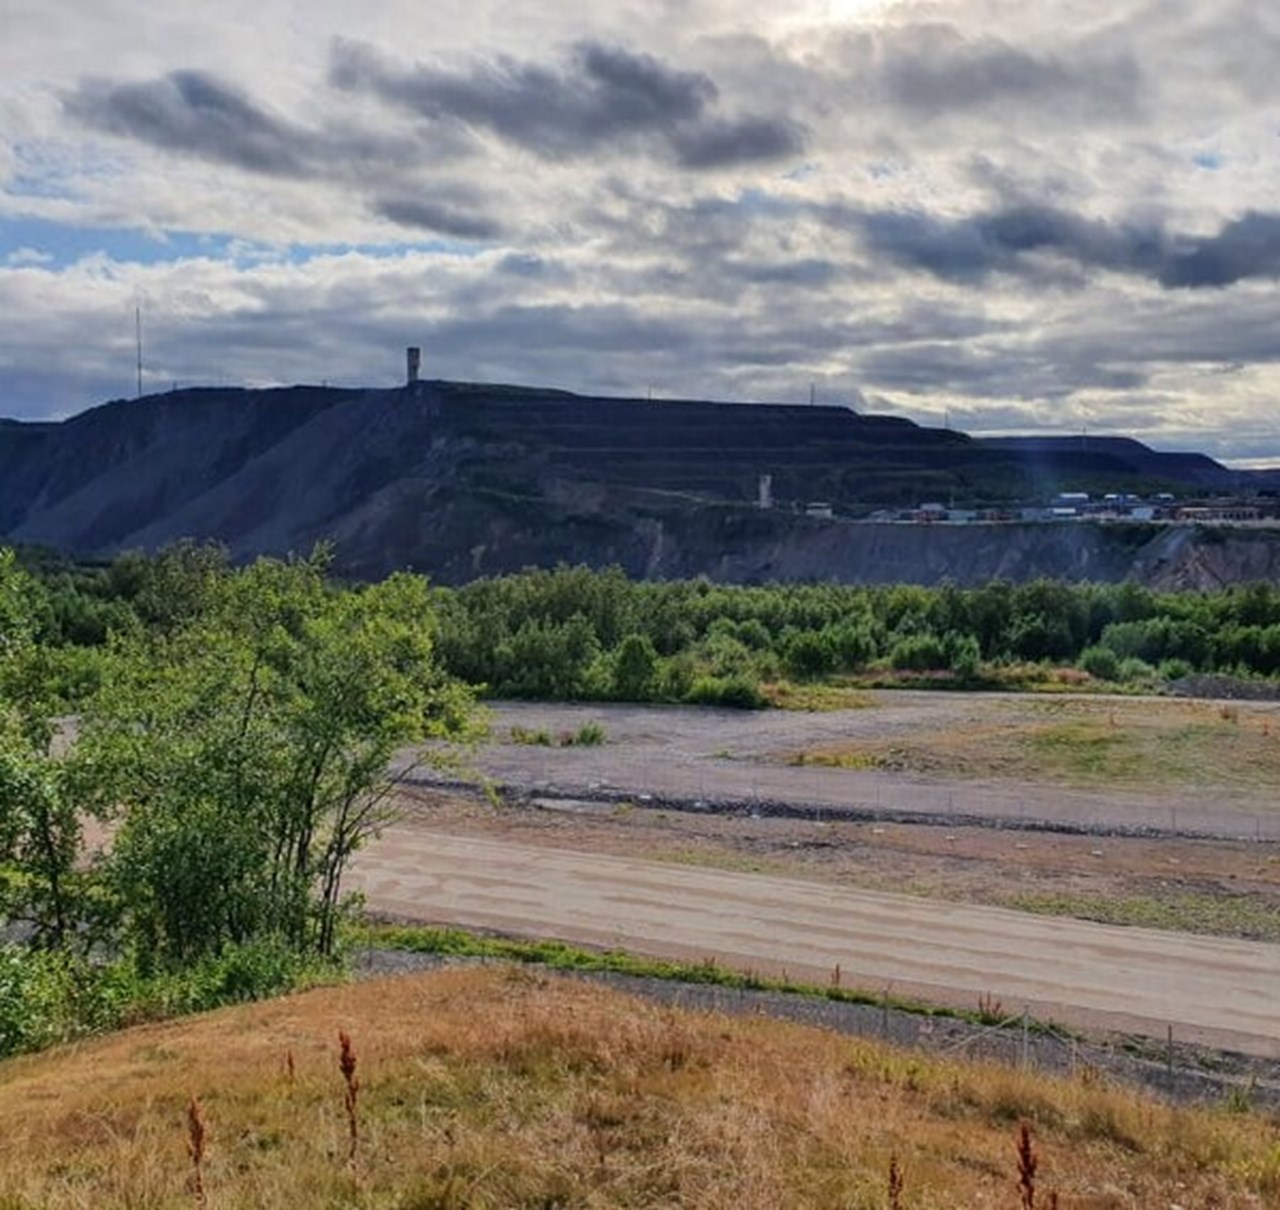 Picture of Kirunavaara, the mountain with the world's largest iron ore mine